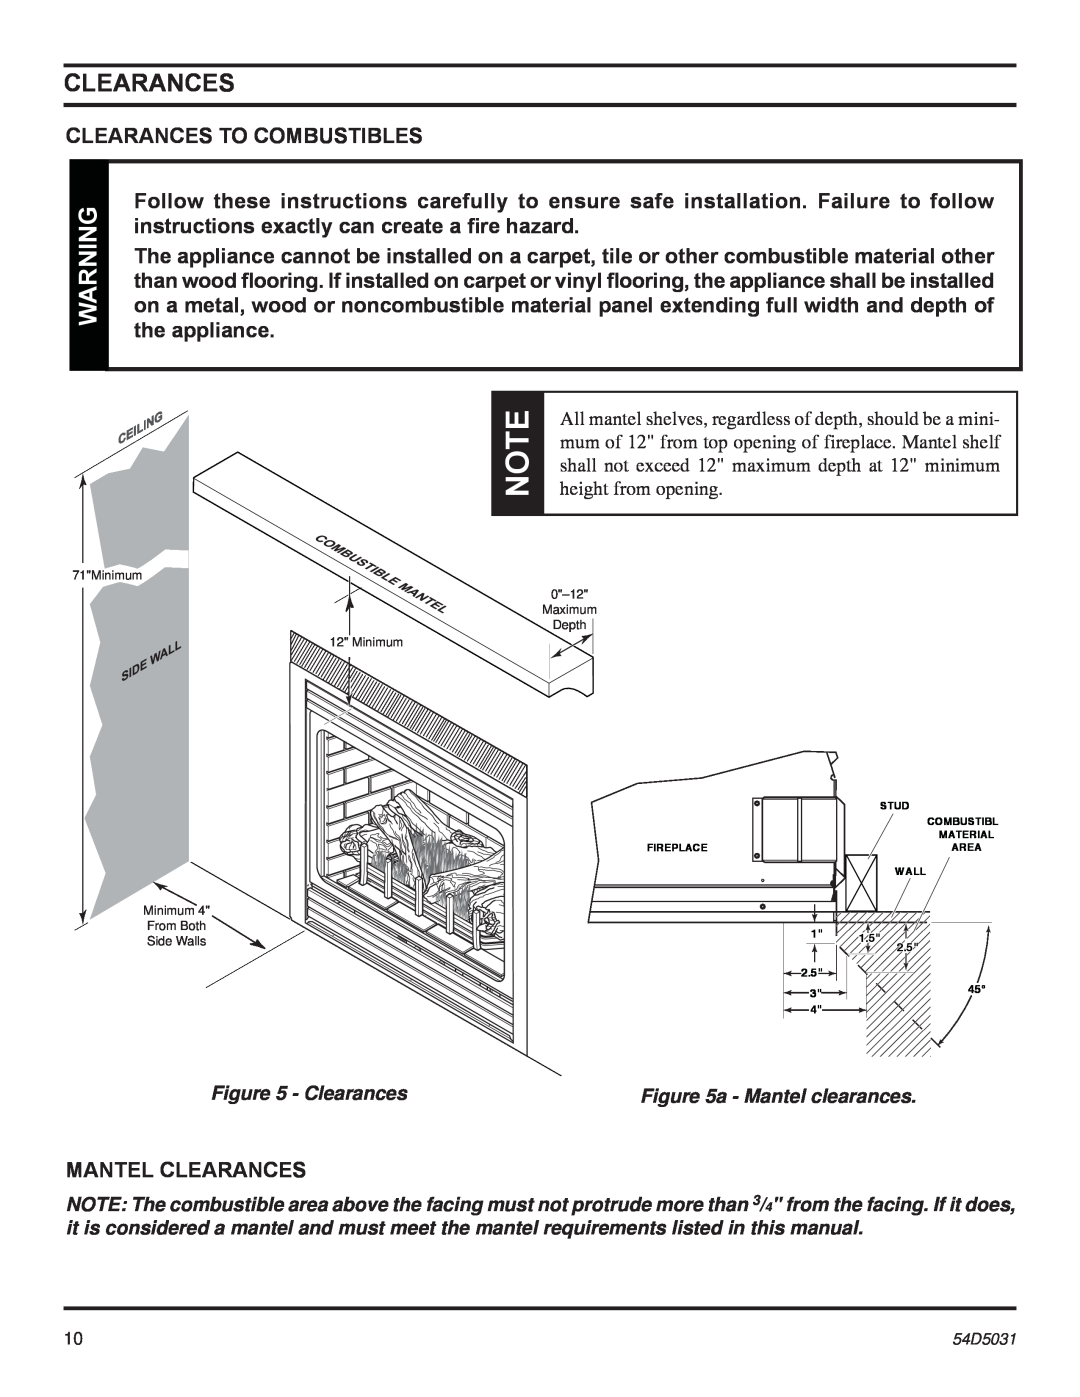 Monessen Hearth HBDV400, HBDV300 manual Clearances To Combustibles, Mantel Clearances 